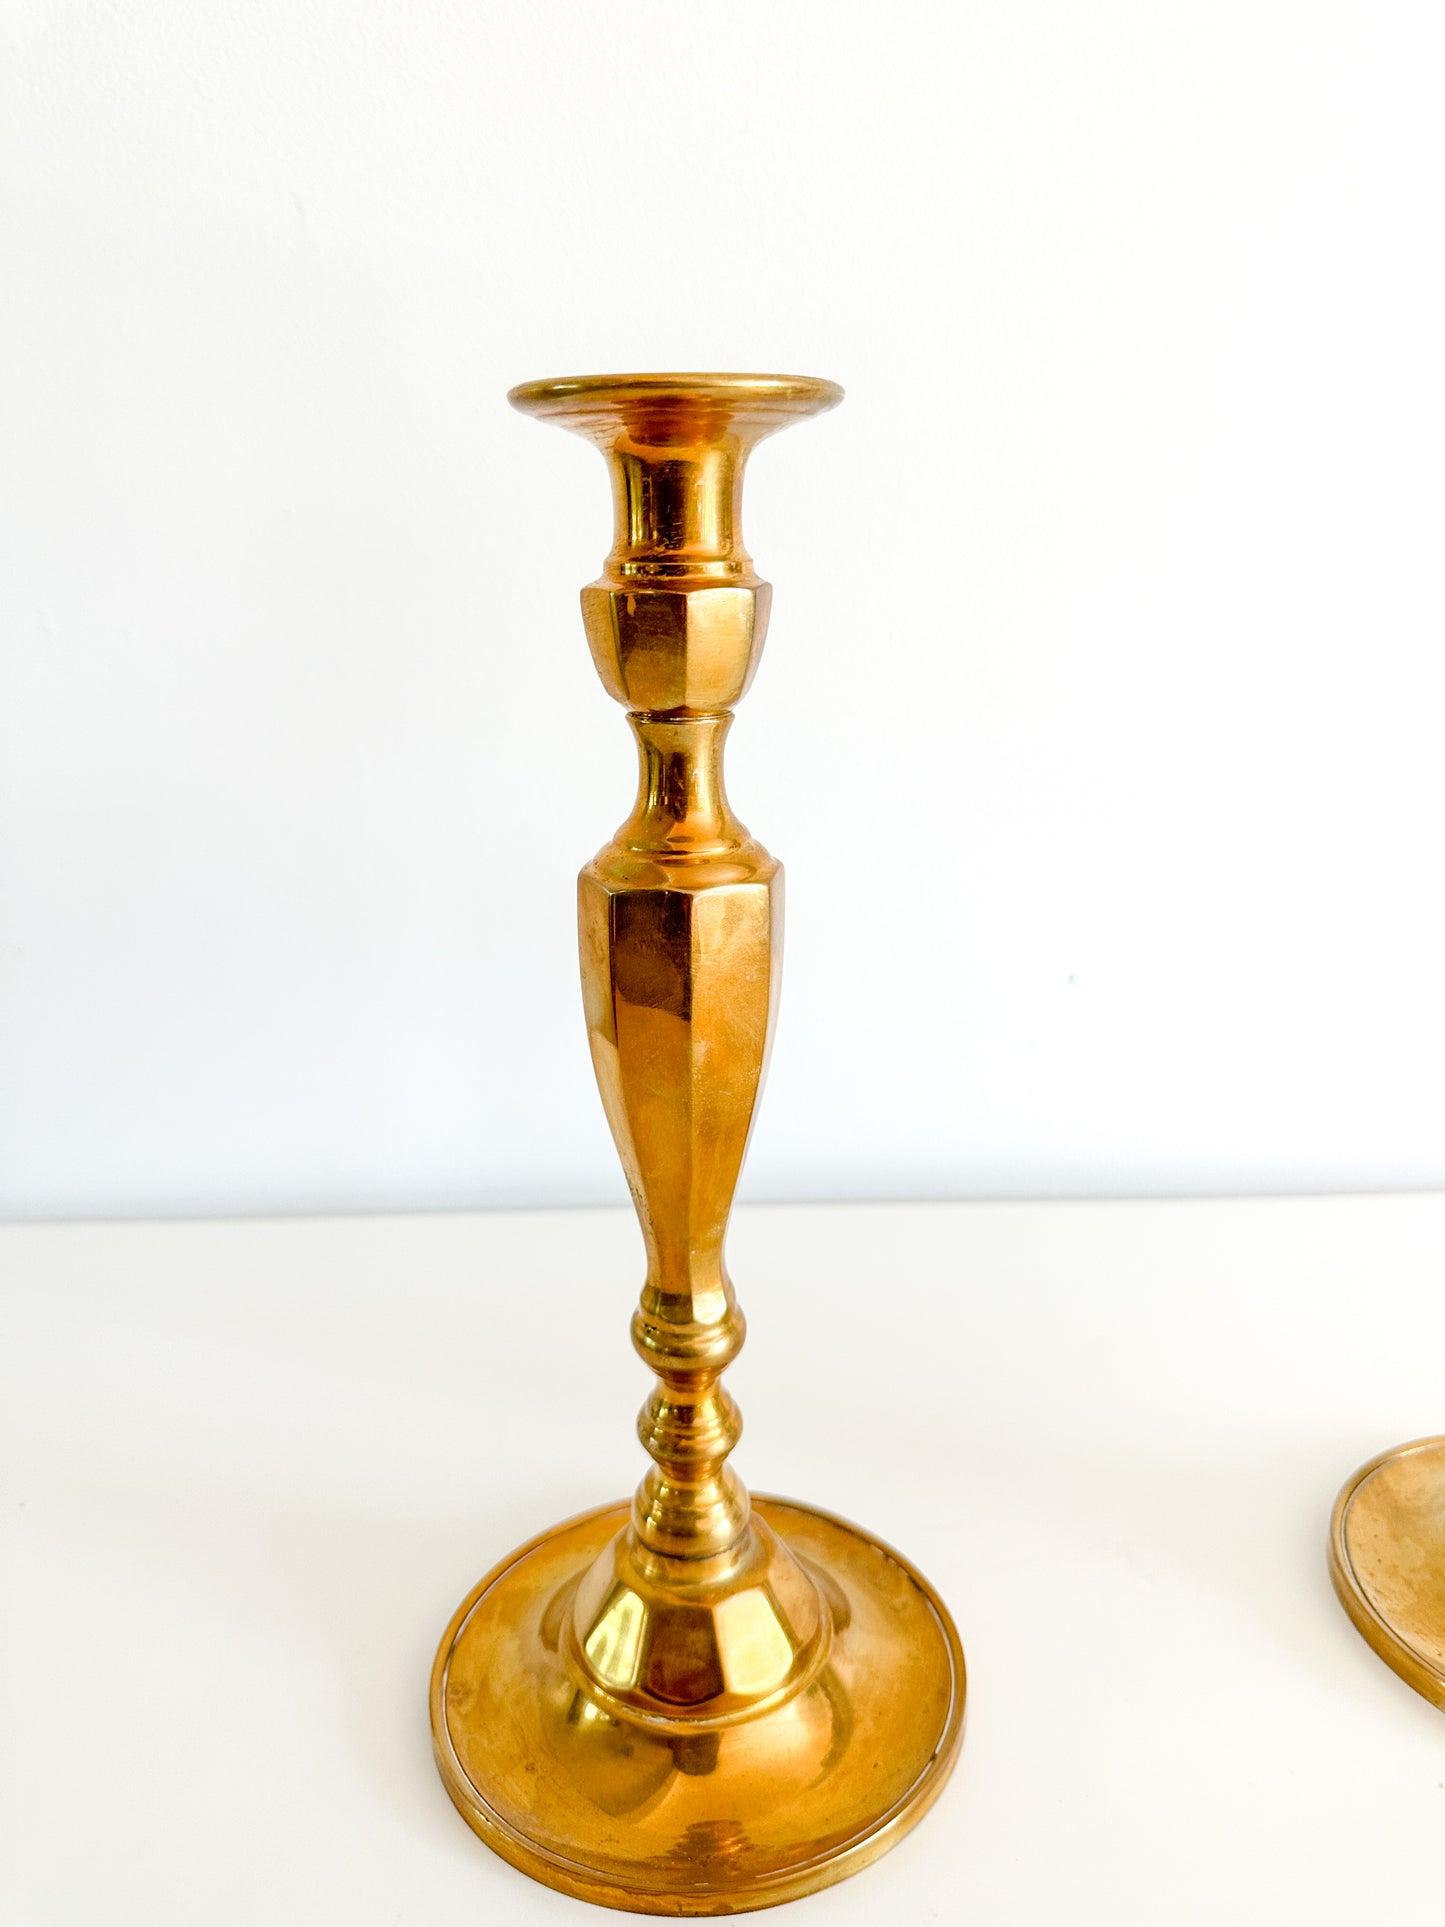 Vintage Pair of Brass Tapered Candle Holders